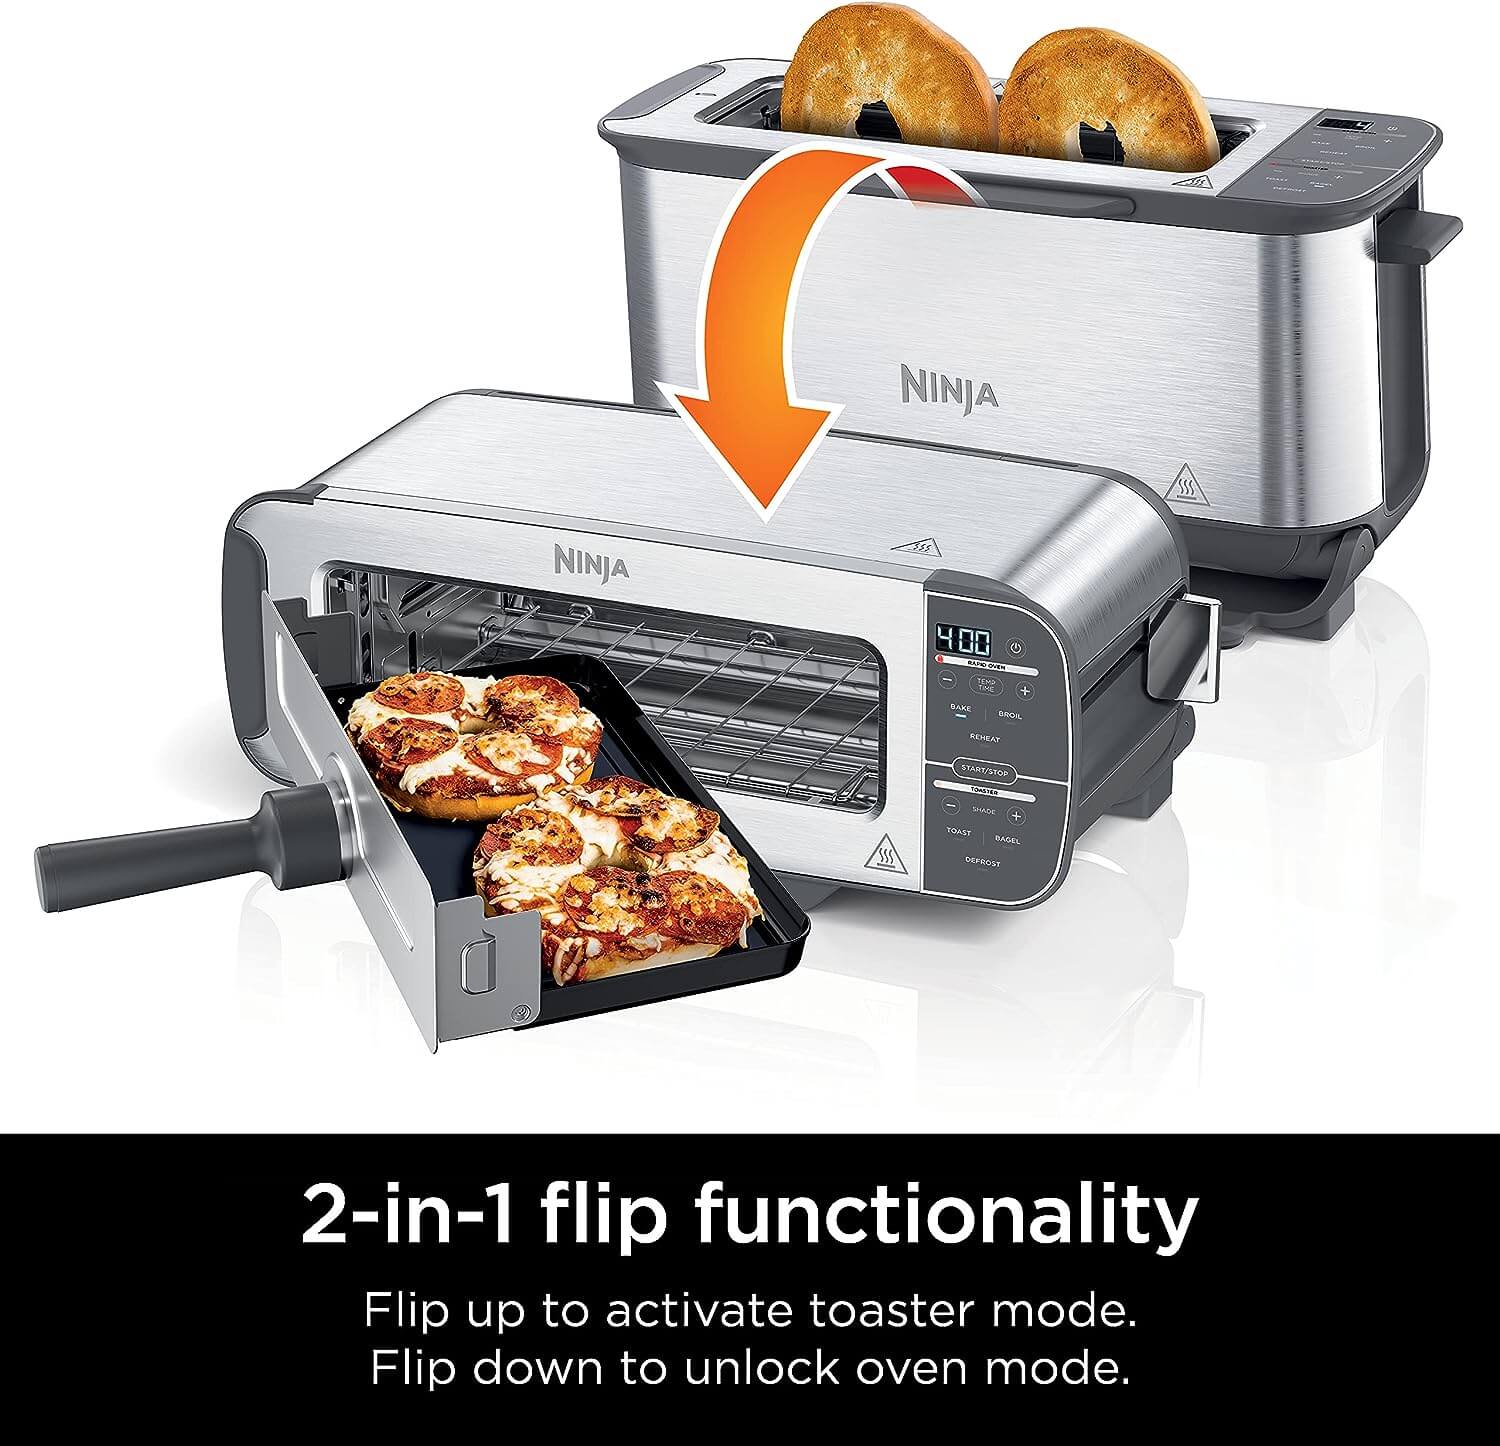 Flipping Breakfast to Snacks: My Culinary Adventure with the Ninja Foodi 2-in-1 Flip Toaster Oven 6